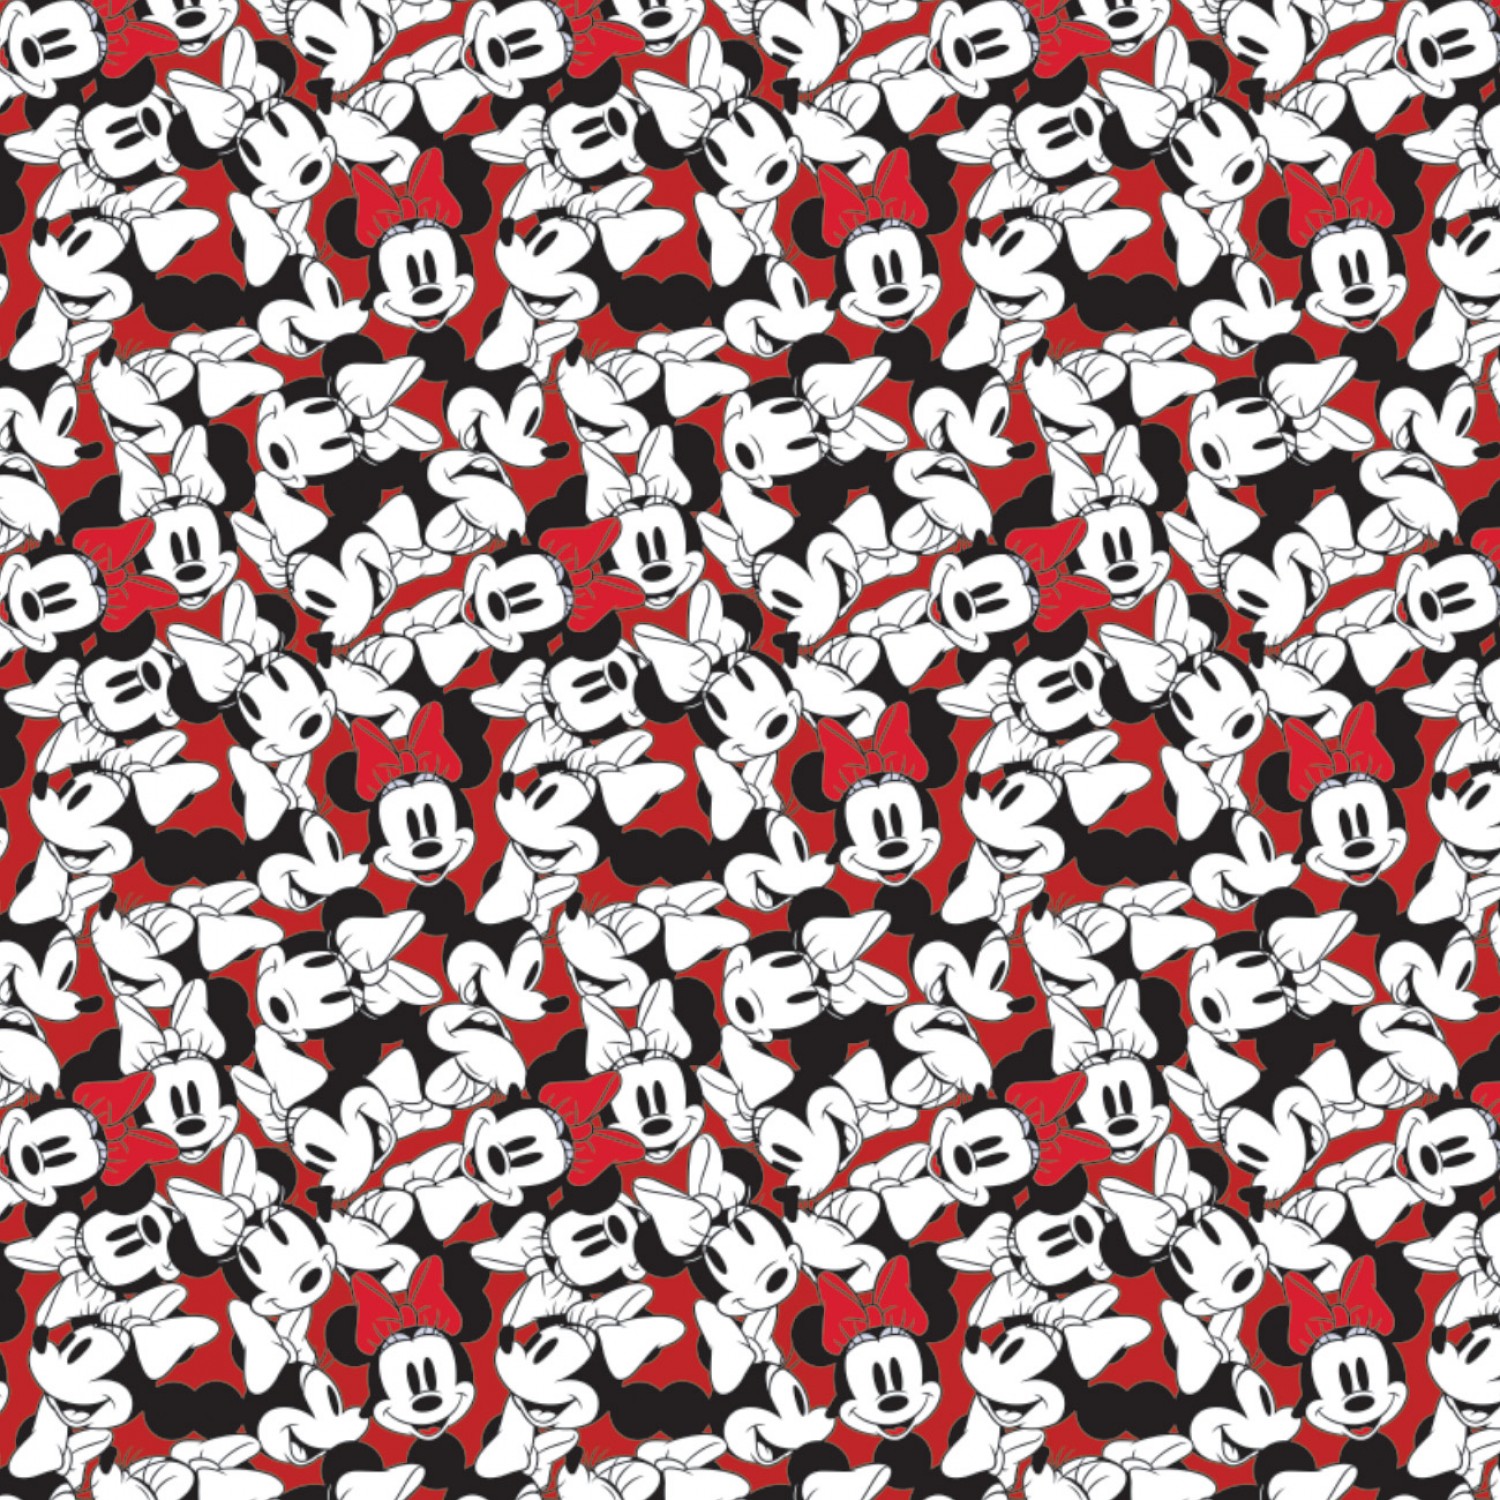 Disney Minnie Mouse Tossed Stack Fabric - Red